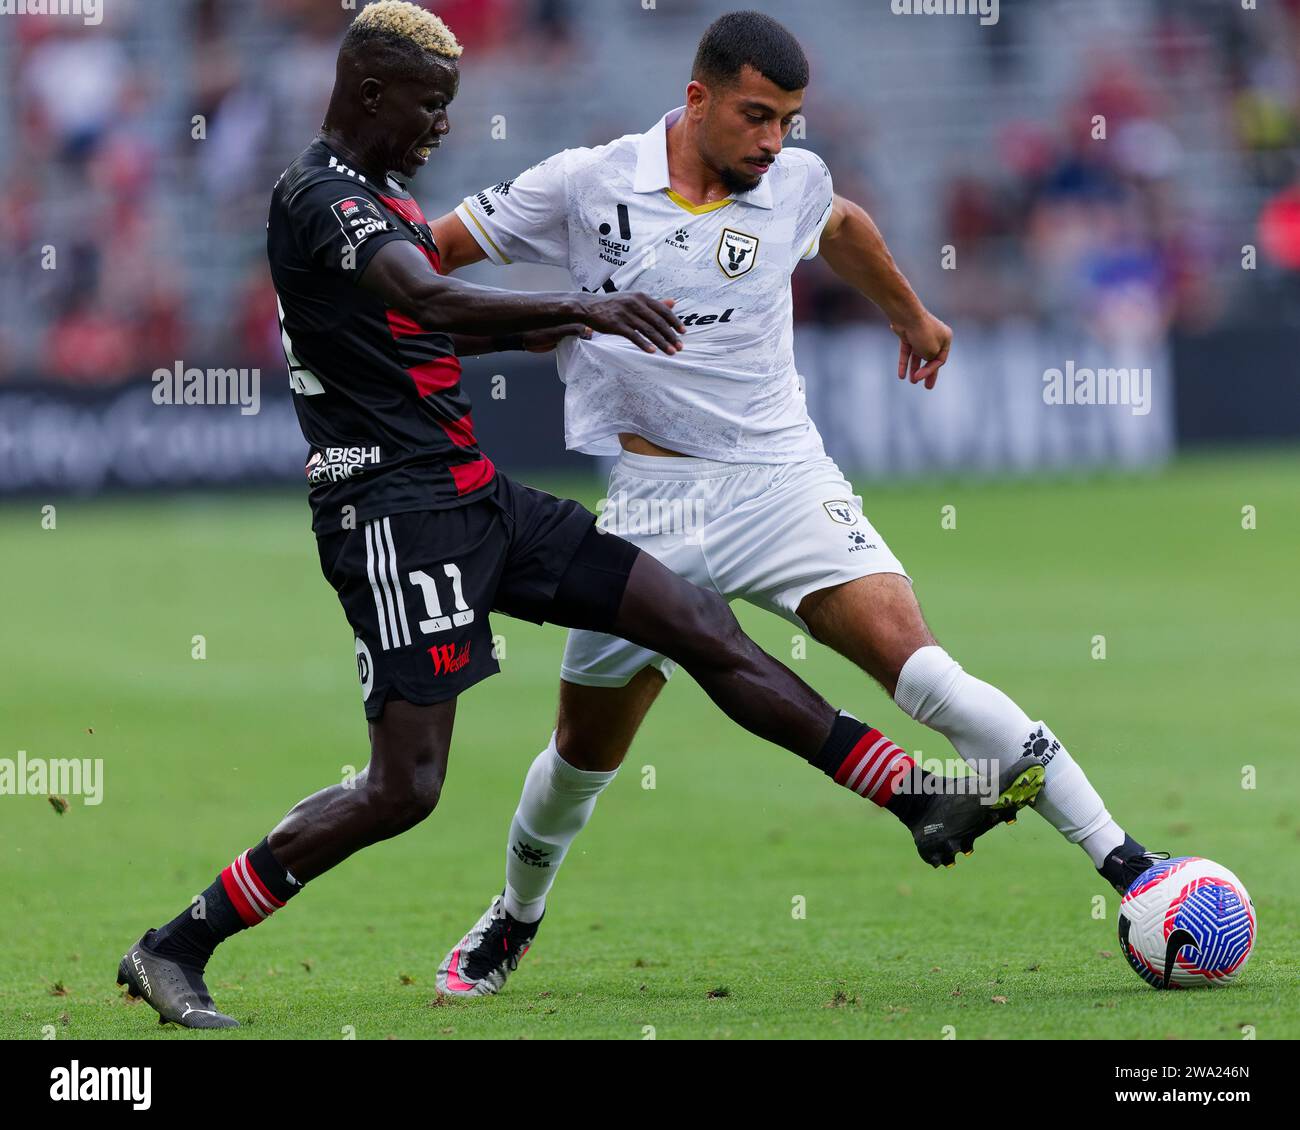 Sydney, Australia. 01st Jan, 2024. Valentino Yuel of the Wanderers competes for the ball with Ali Auglah of Macarthur during the A-League match between the Wanderers and Macarthur at CommBank Stadium on January 1, 2024 Credit: IOIO IMAGES/Alamy Live News Stock Photo